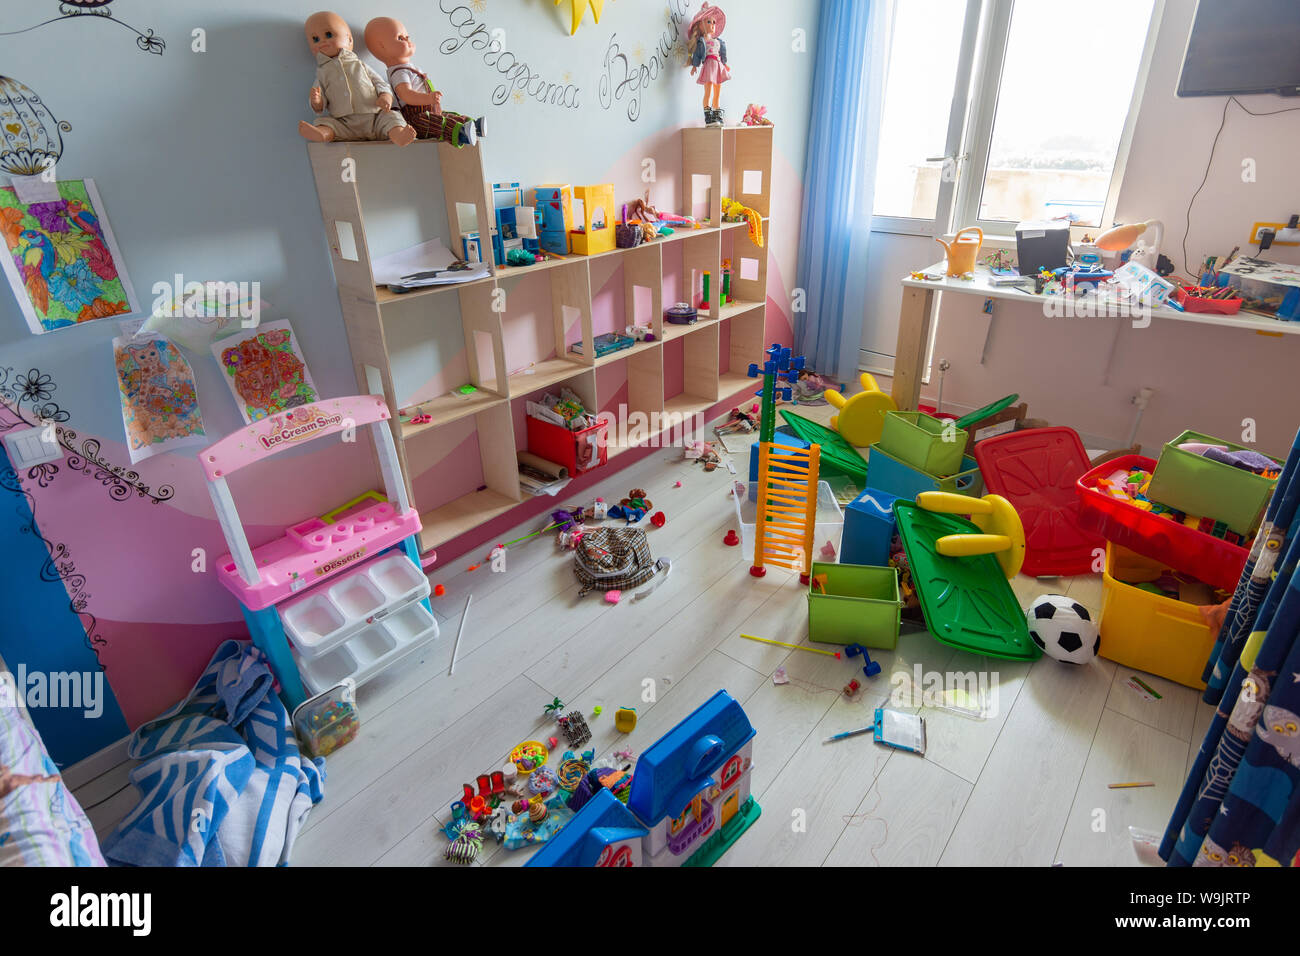 Anapa, Russia - August 8, 2019: mess after leaving guests in the children's room Stock Photo